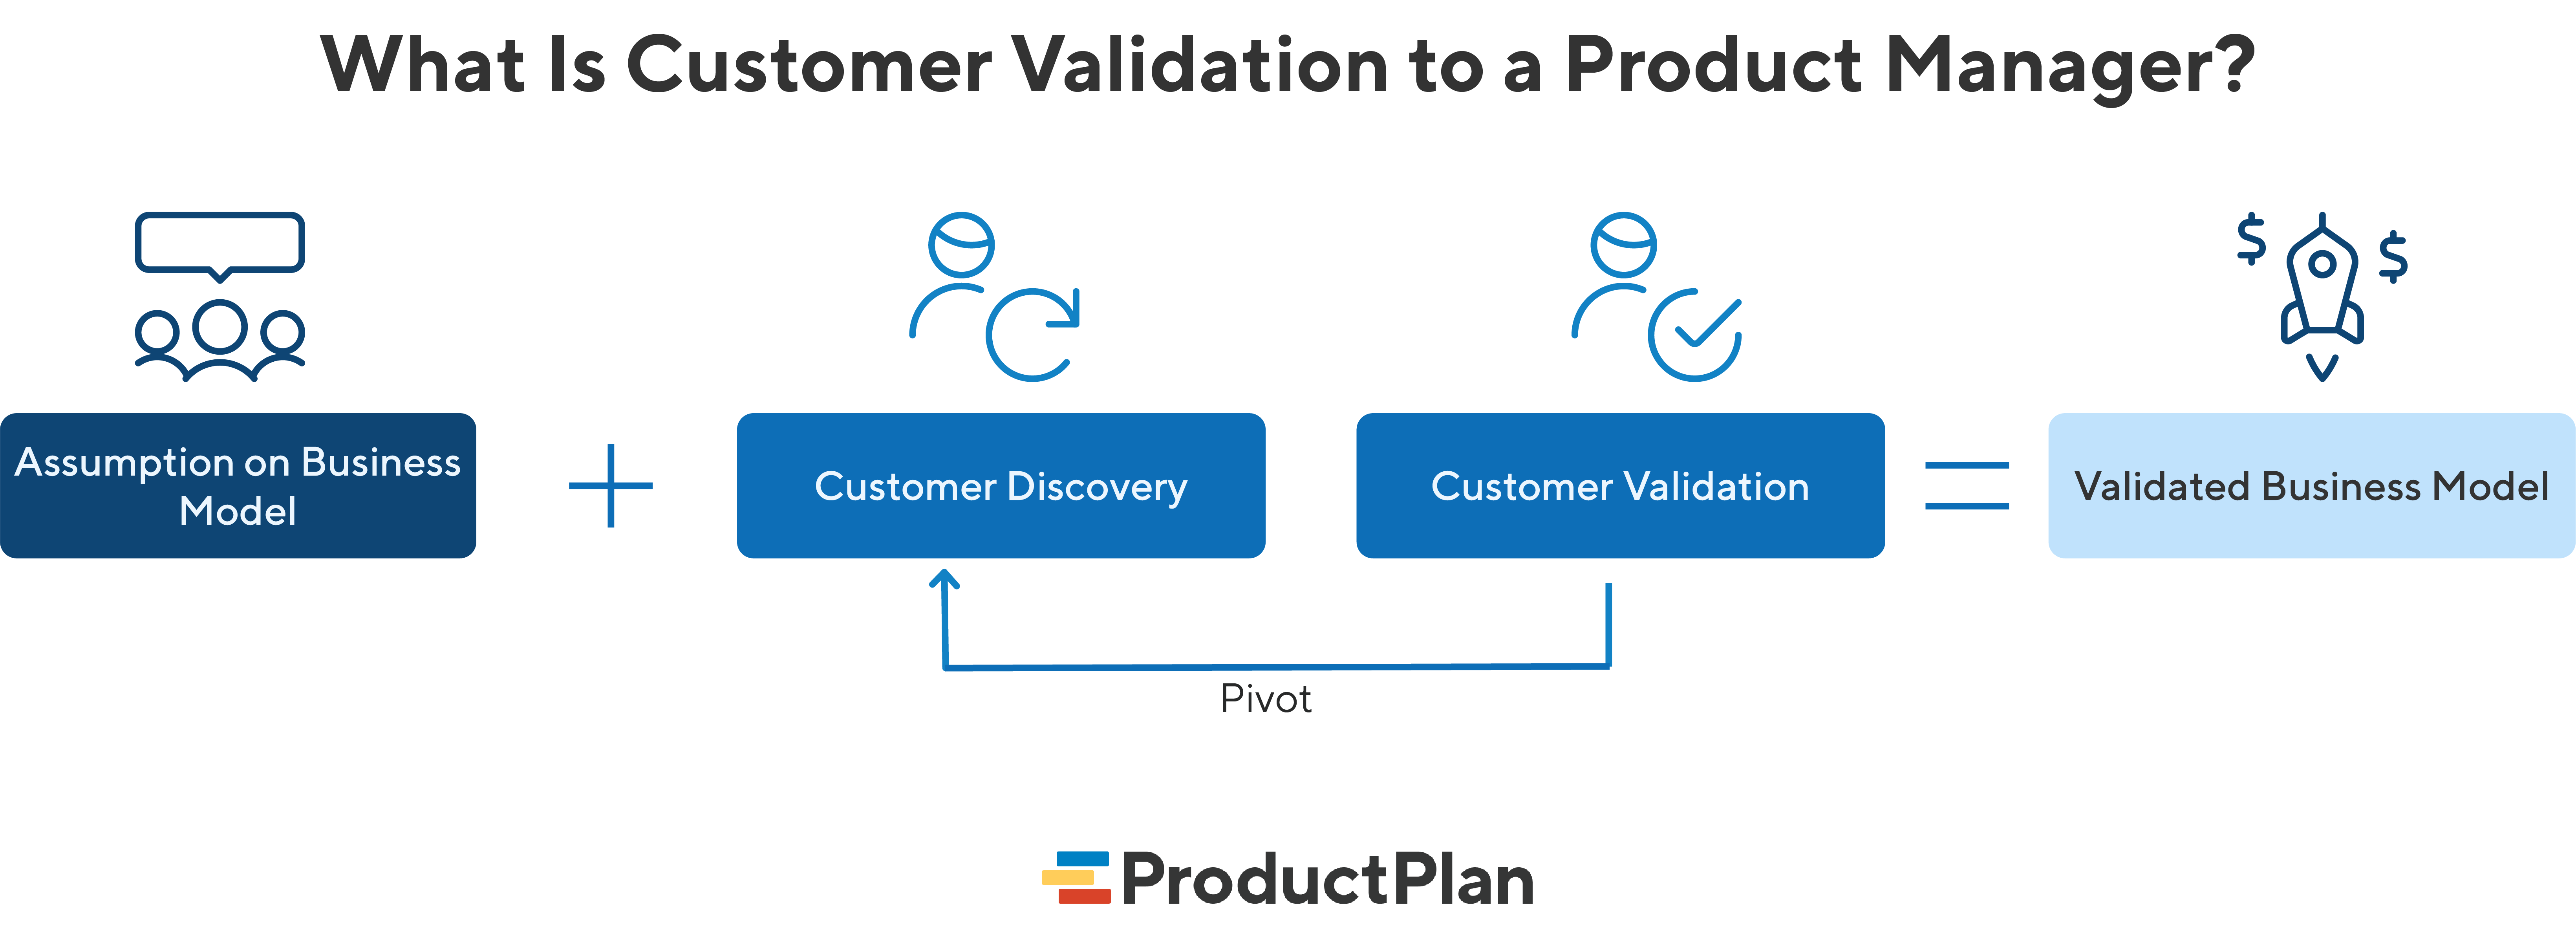 What is customer validation to a product manager? 